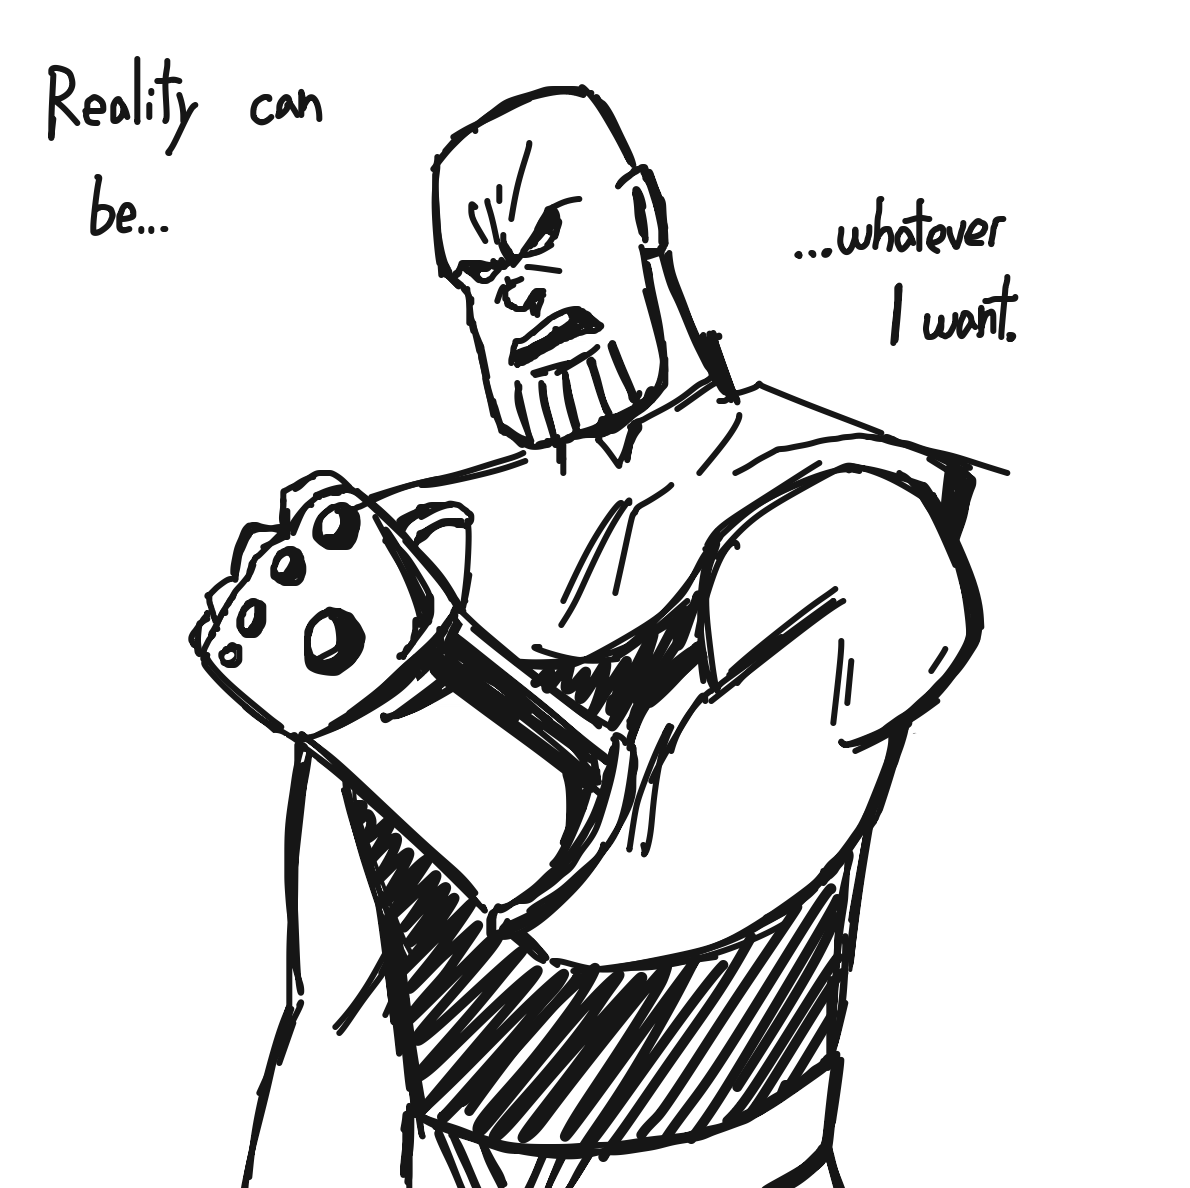 what do thanos want reality to be huh? - Online Drawing Game Comic Strip Panel by pixie_press